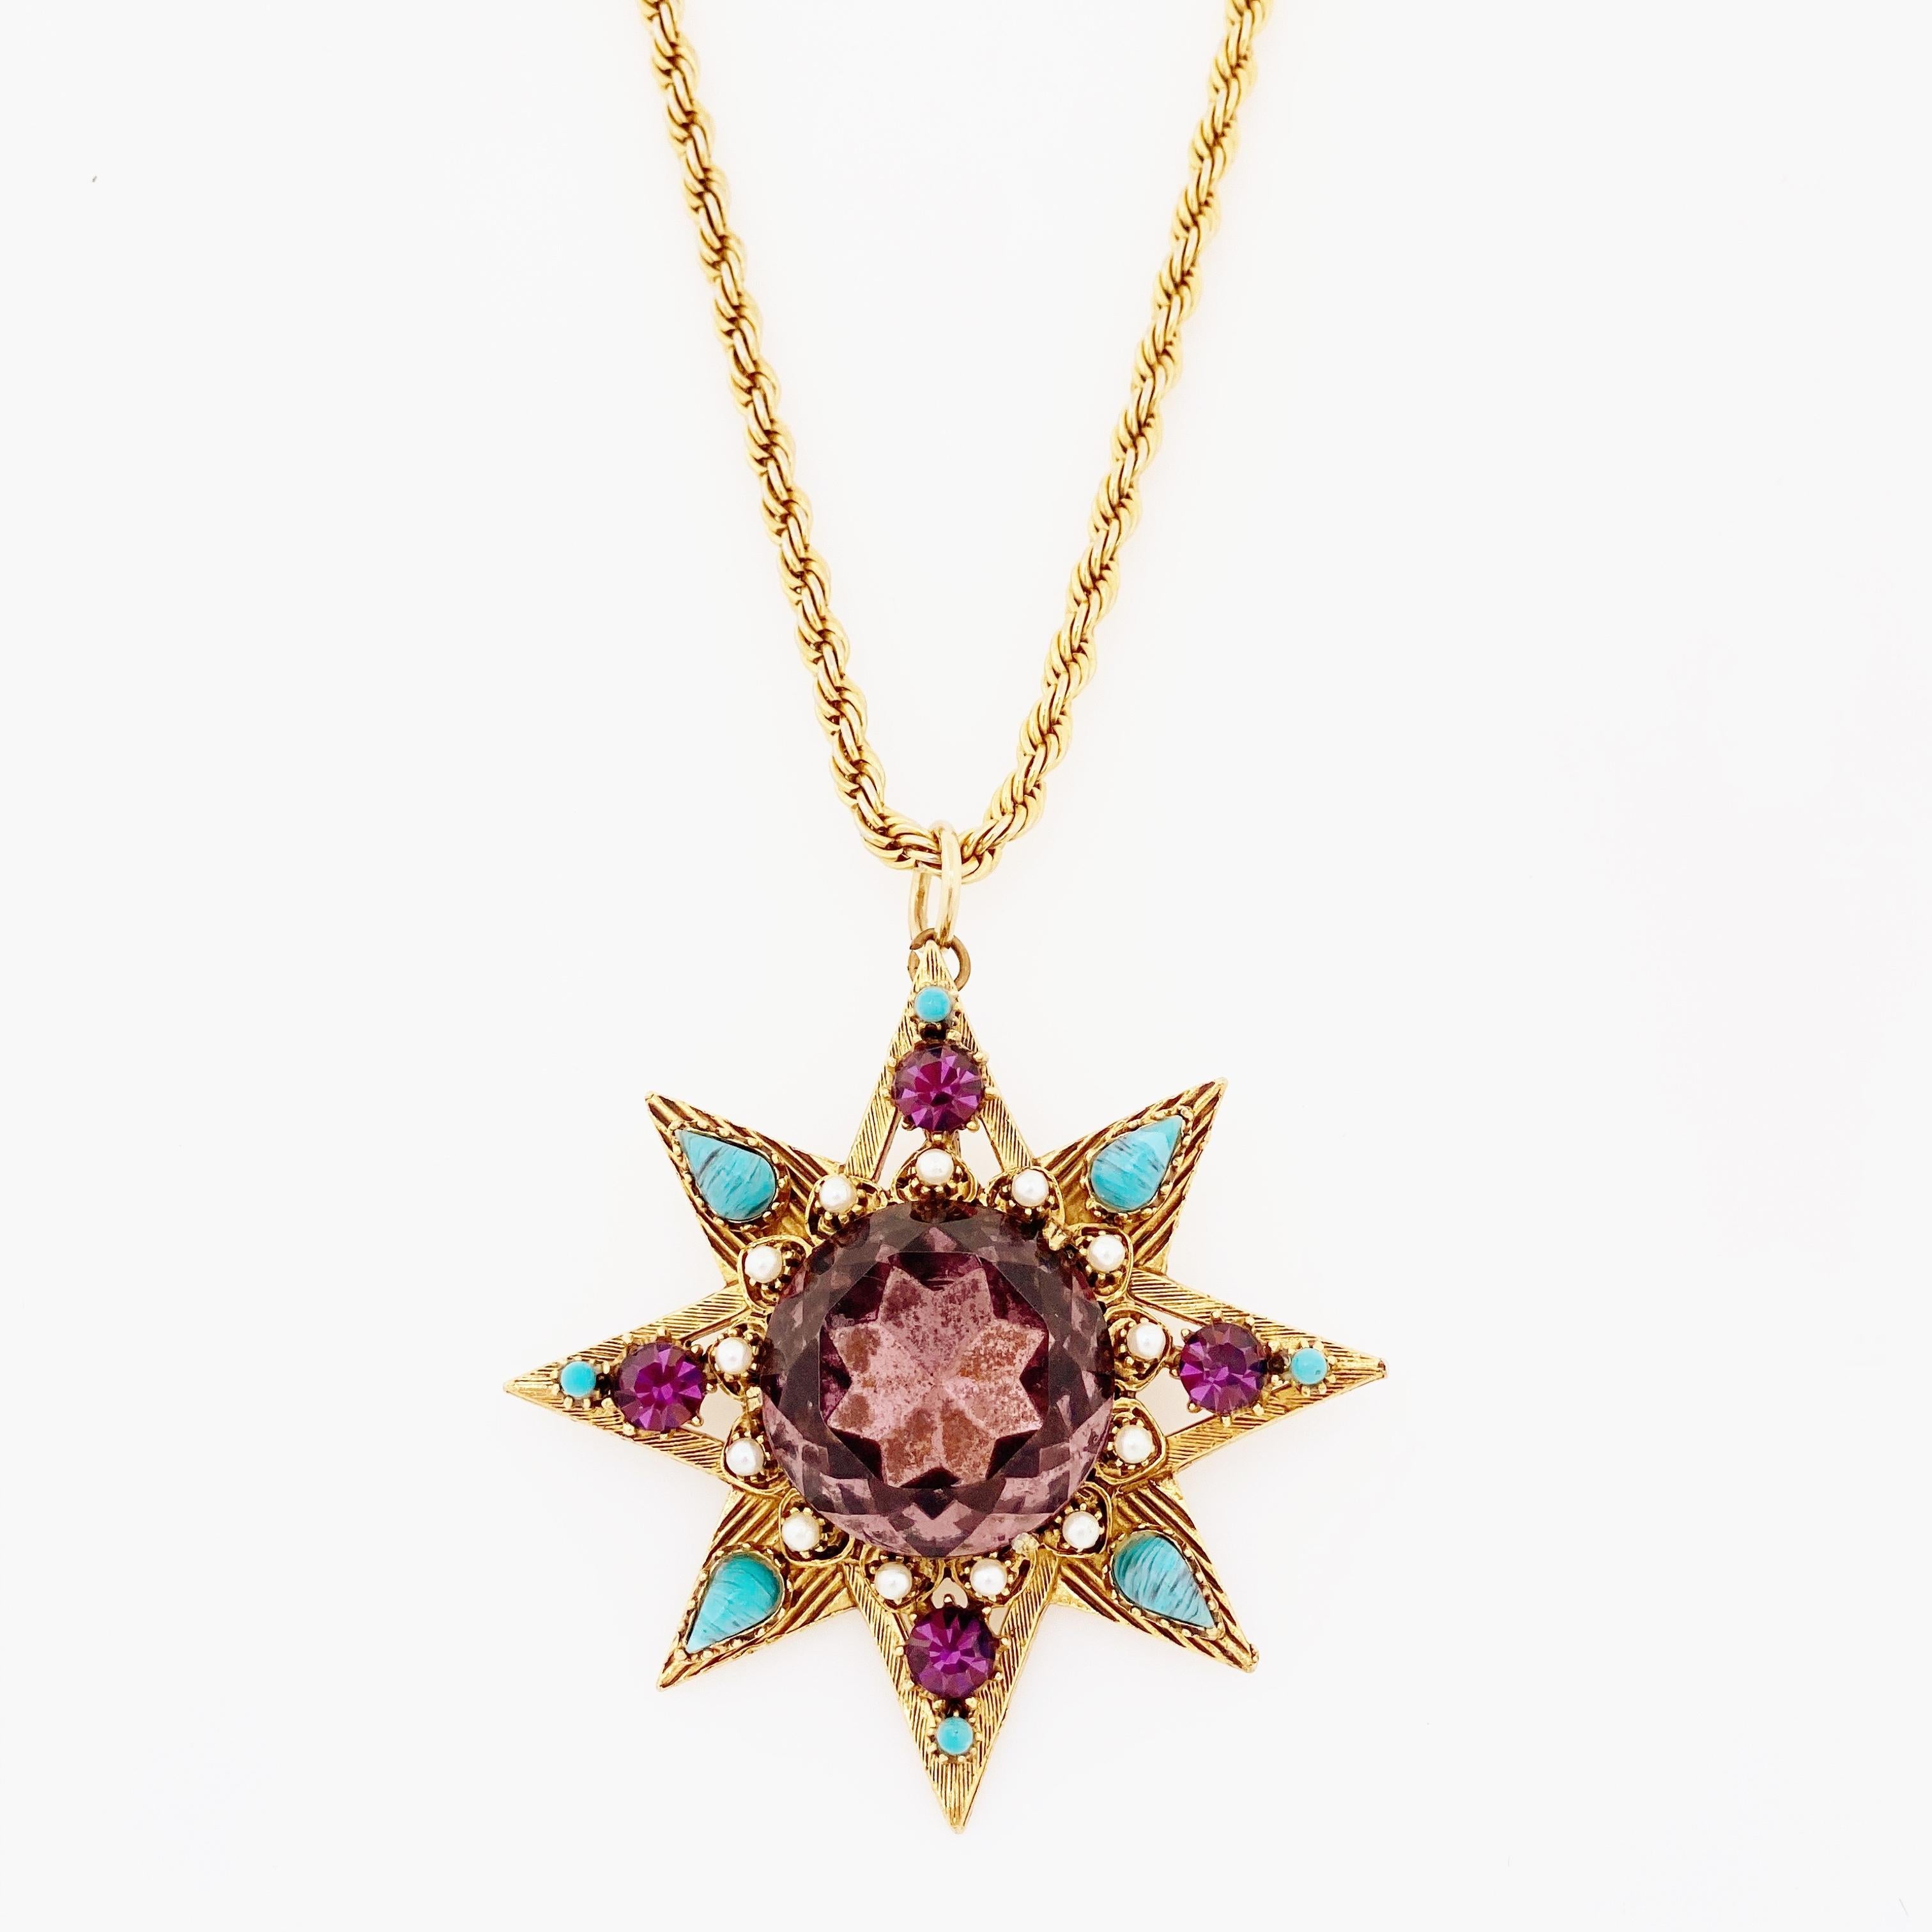 Modern Star Pendant Necklace With Amethyst Crystal and Turquoise By Florenza, 1960s